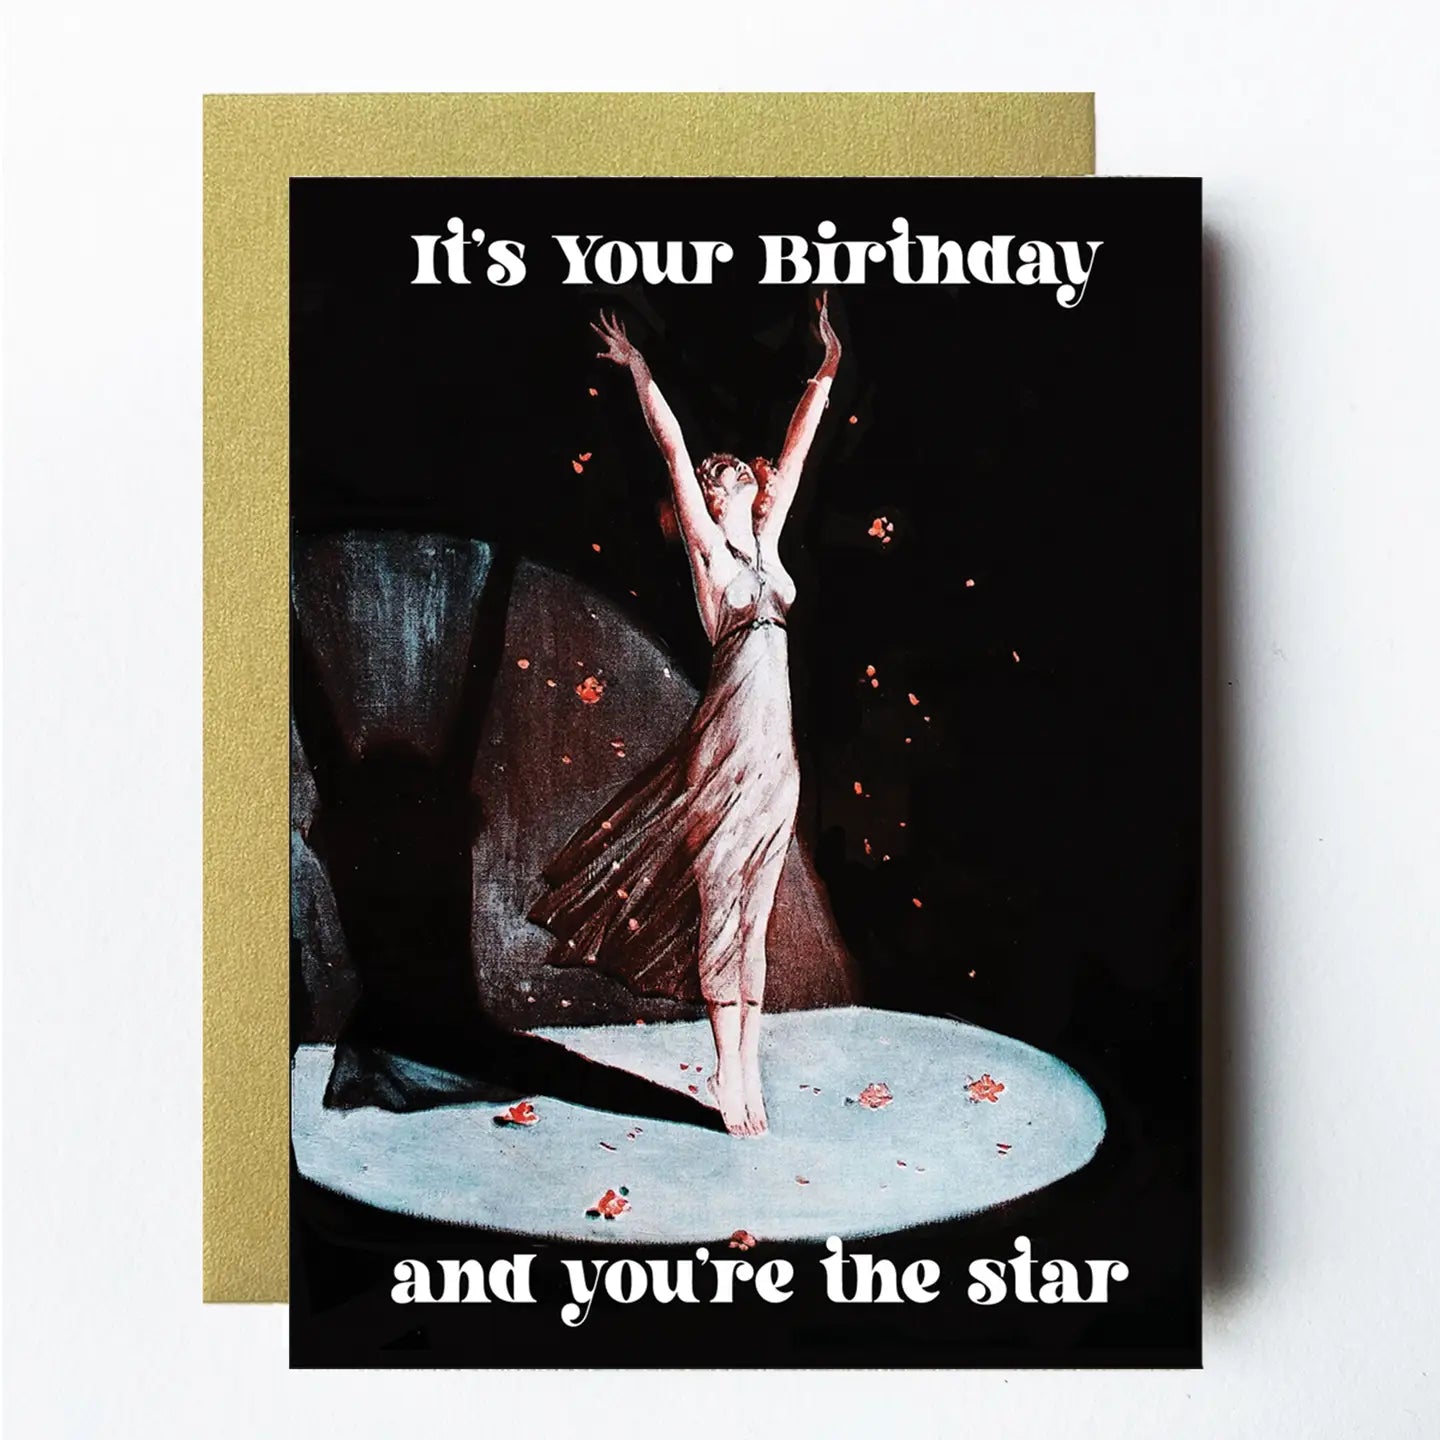 It's your birthday and you're the star greeting card